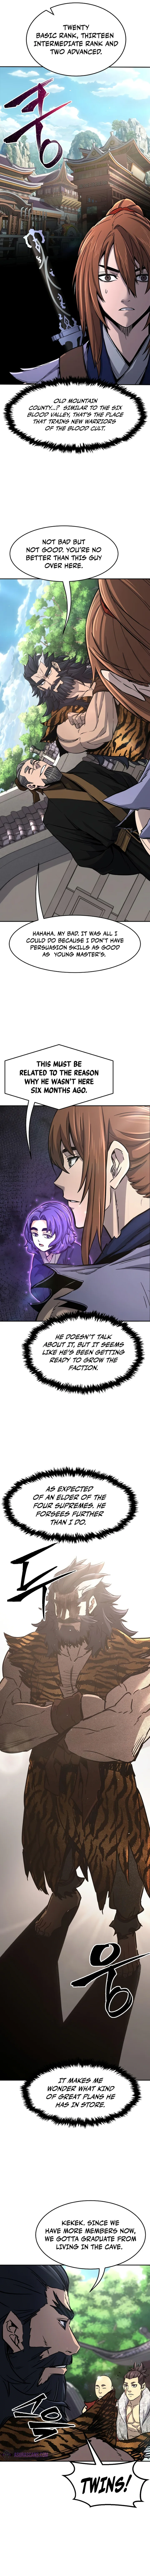 Absolute Sword Sense - Chapter 34 Page 4